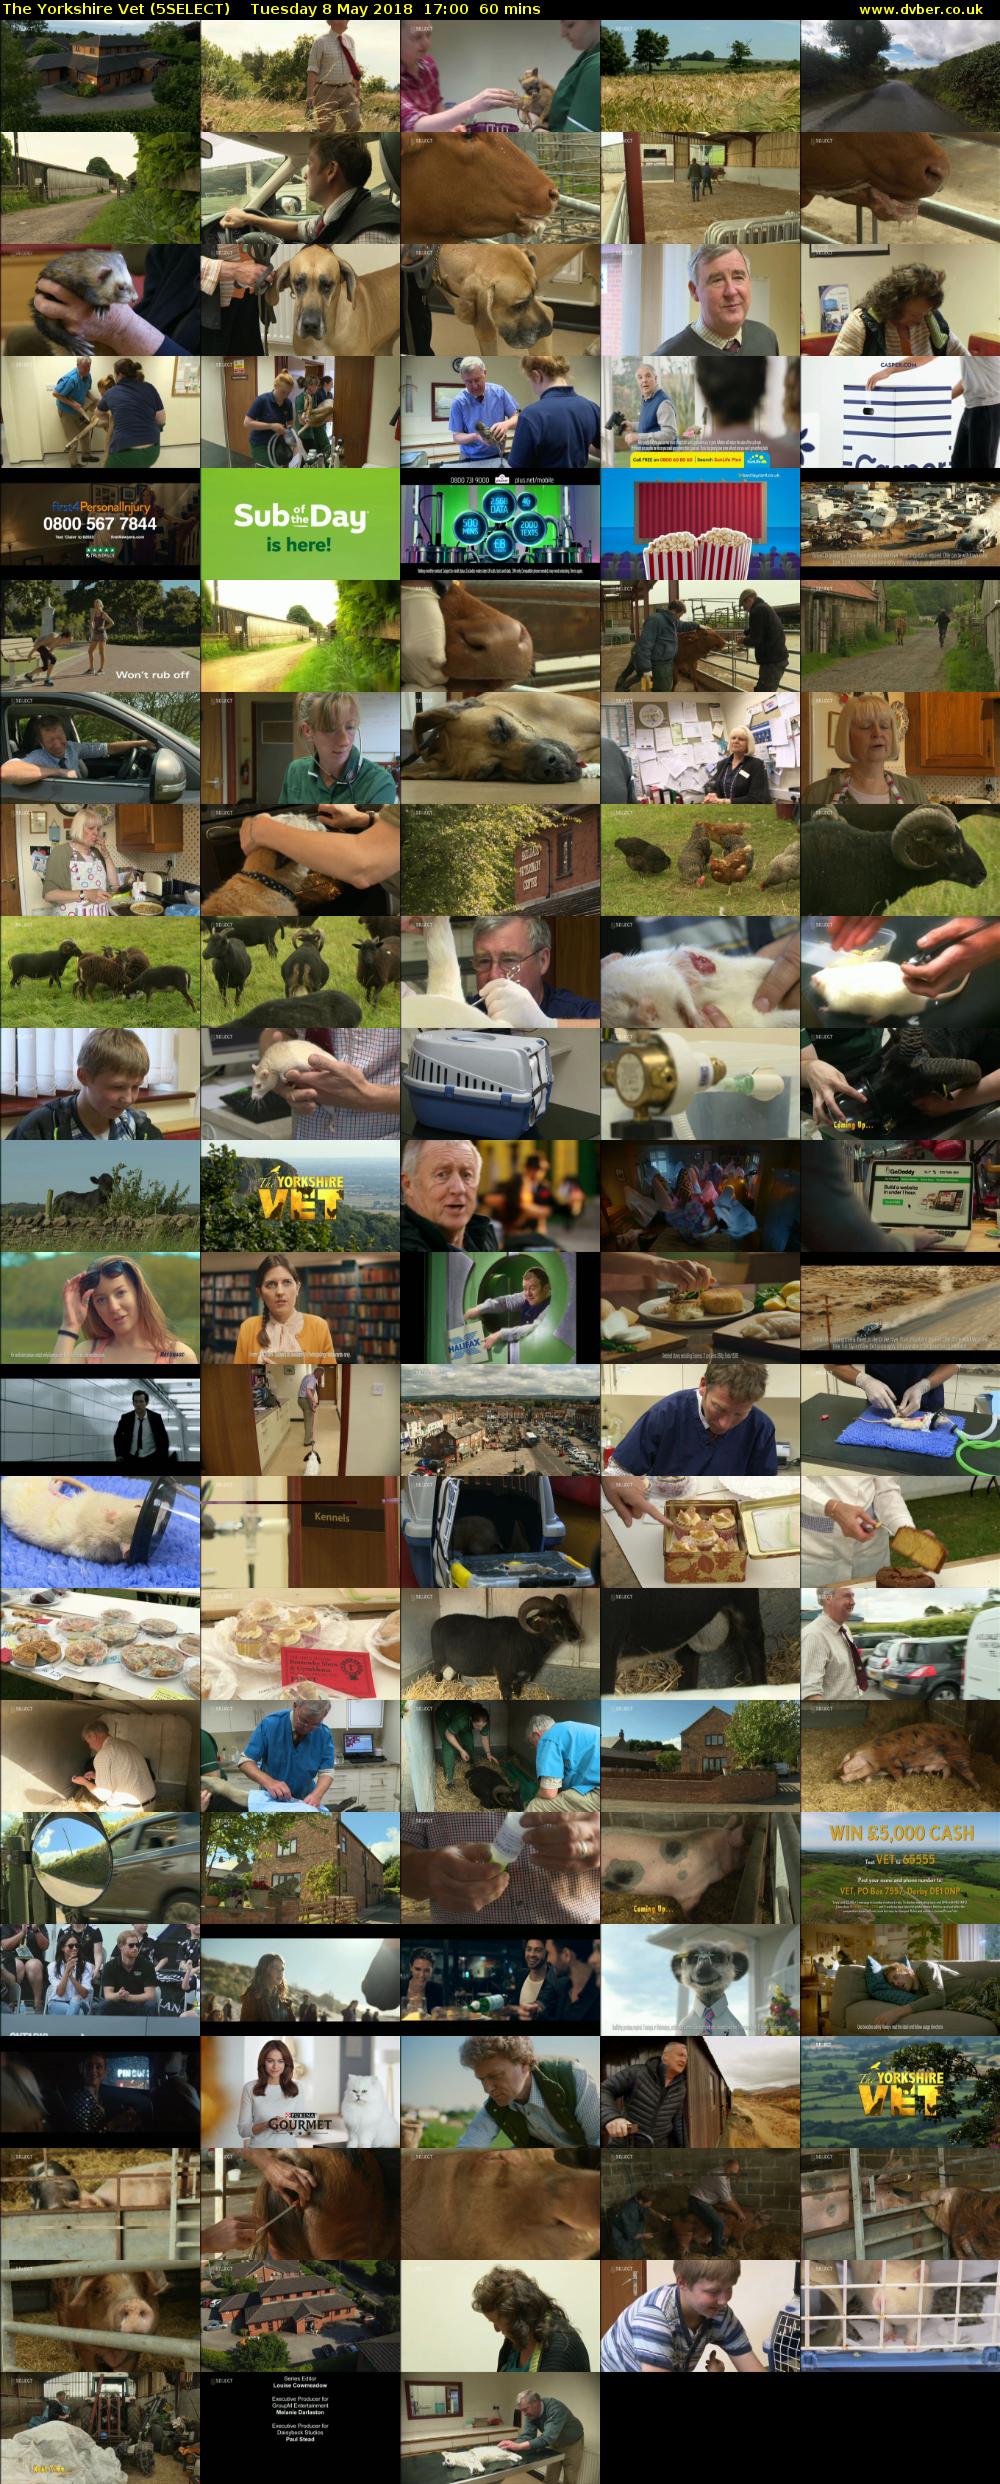 The Yorkshire Vet (5SELECT) Tuesday 8 May 2018 17:00 - 18:00